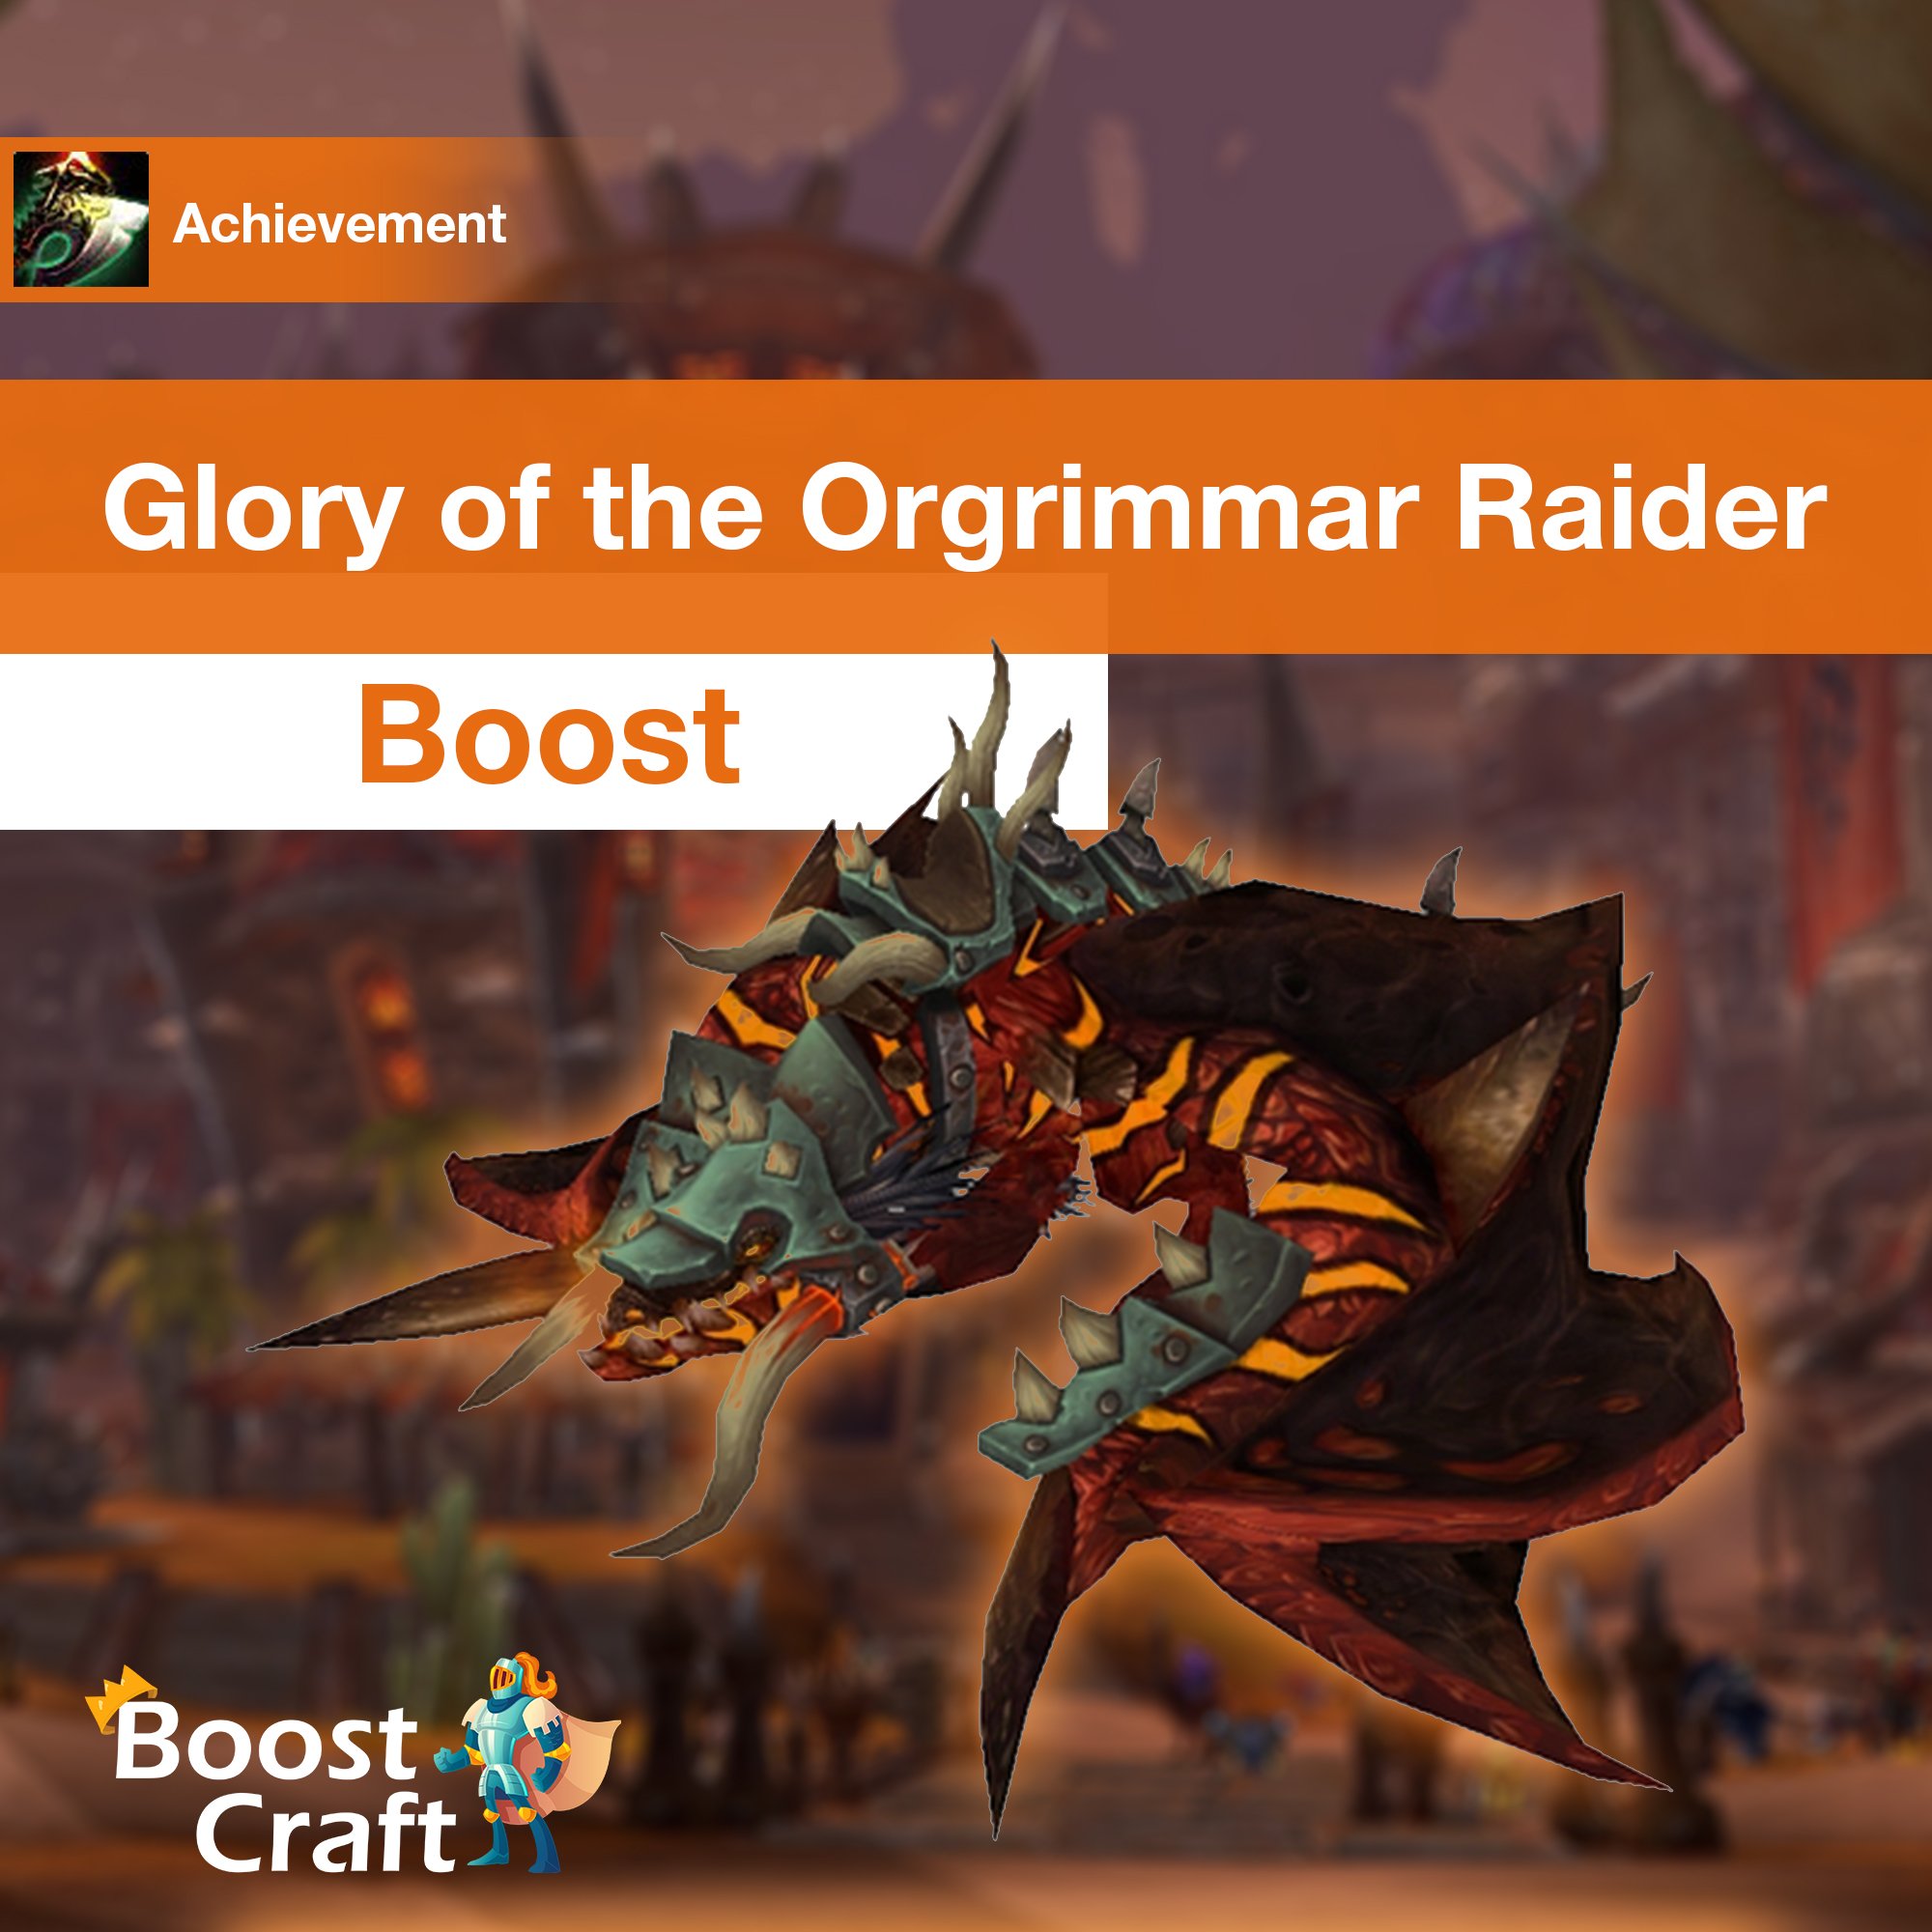 [Glory of the Orgrimmar Raider] Boost